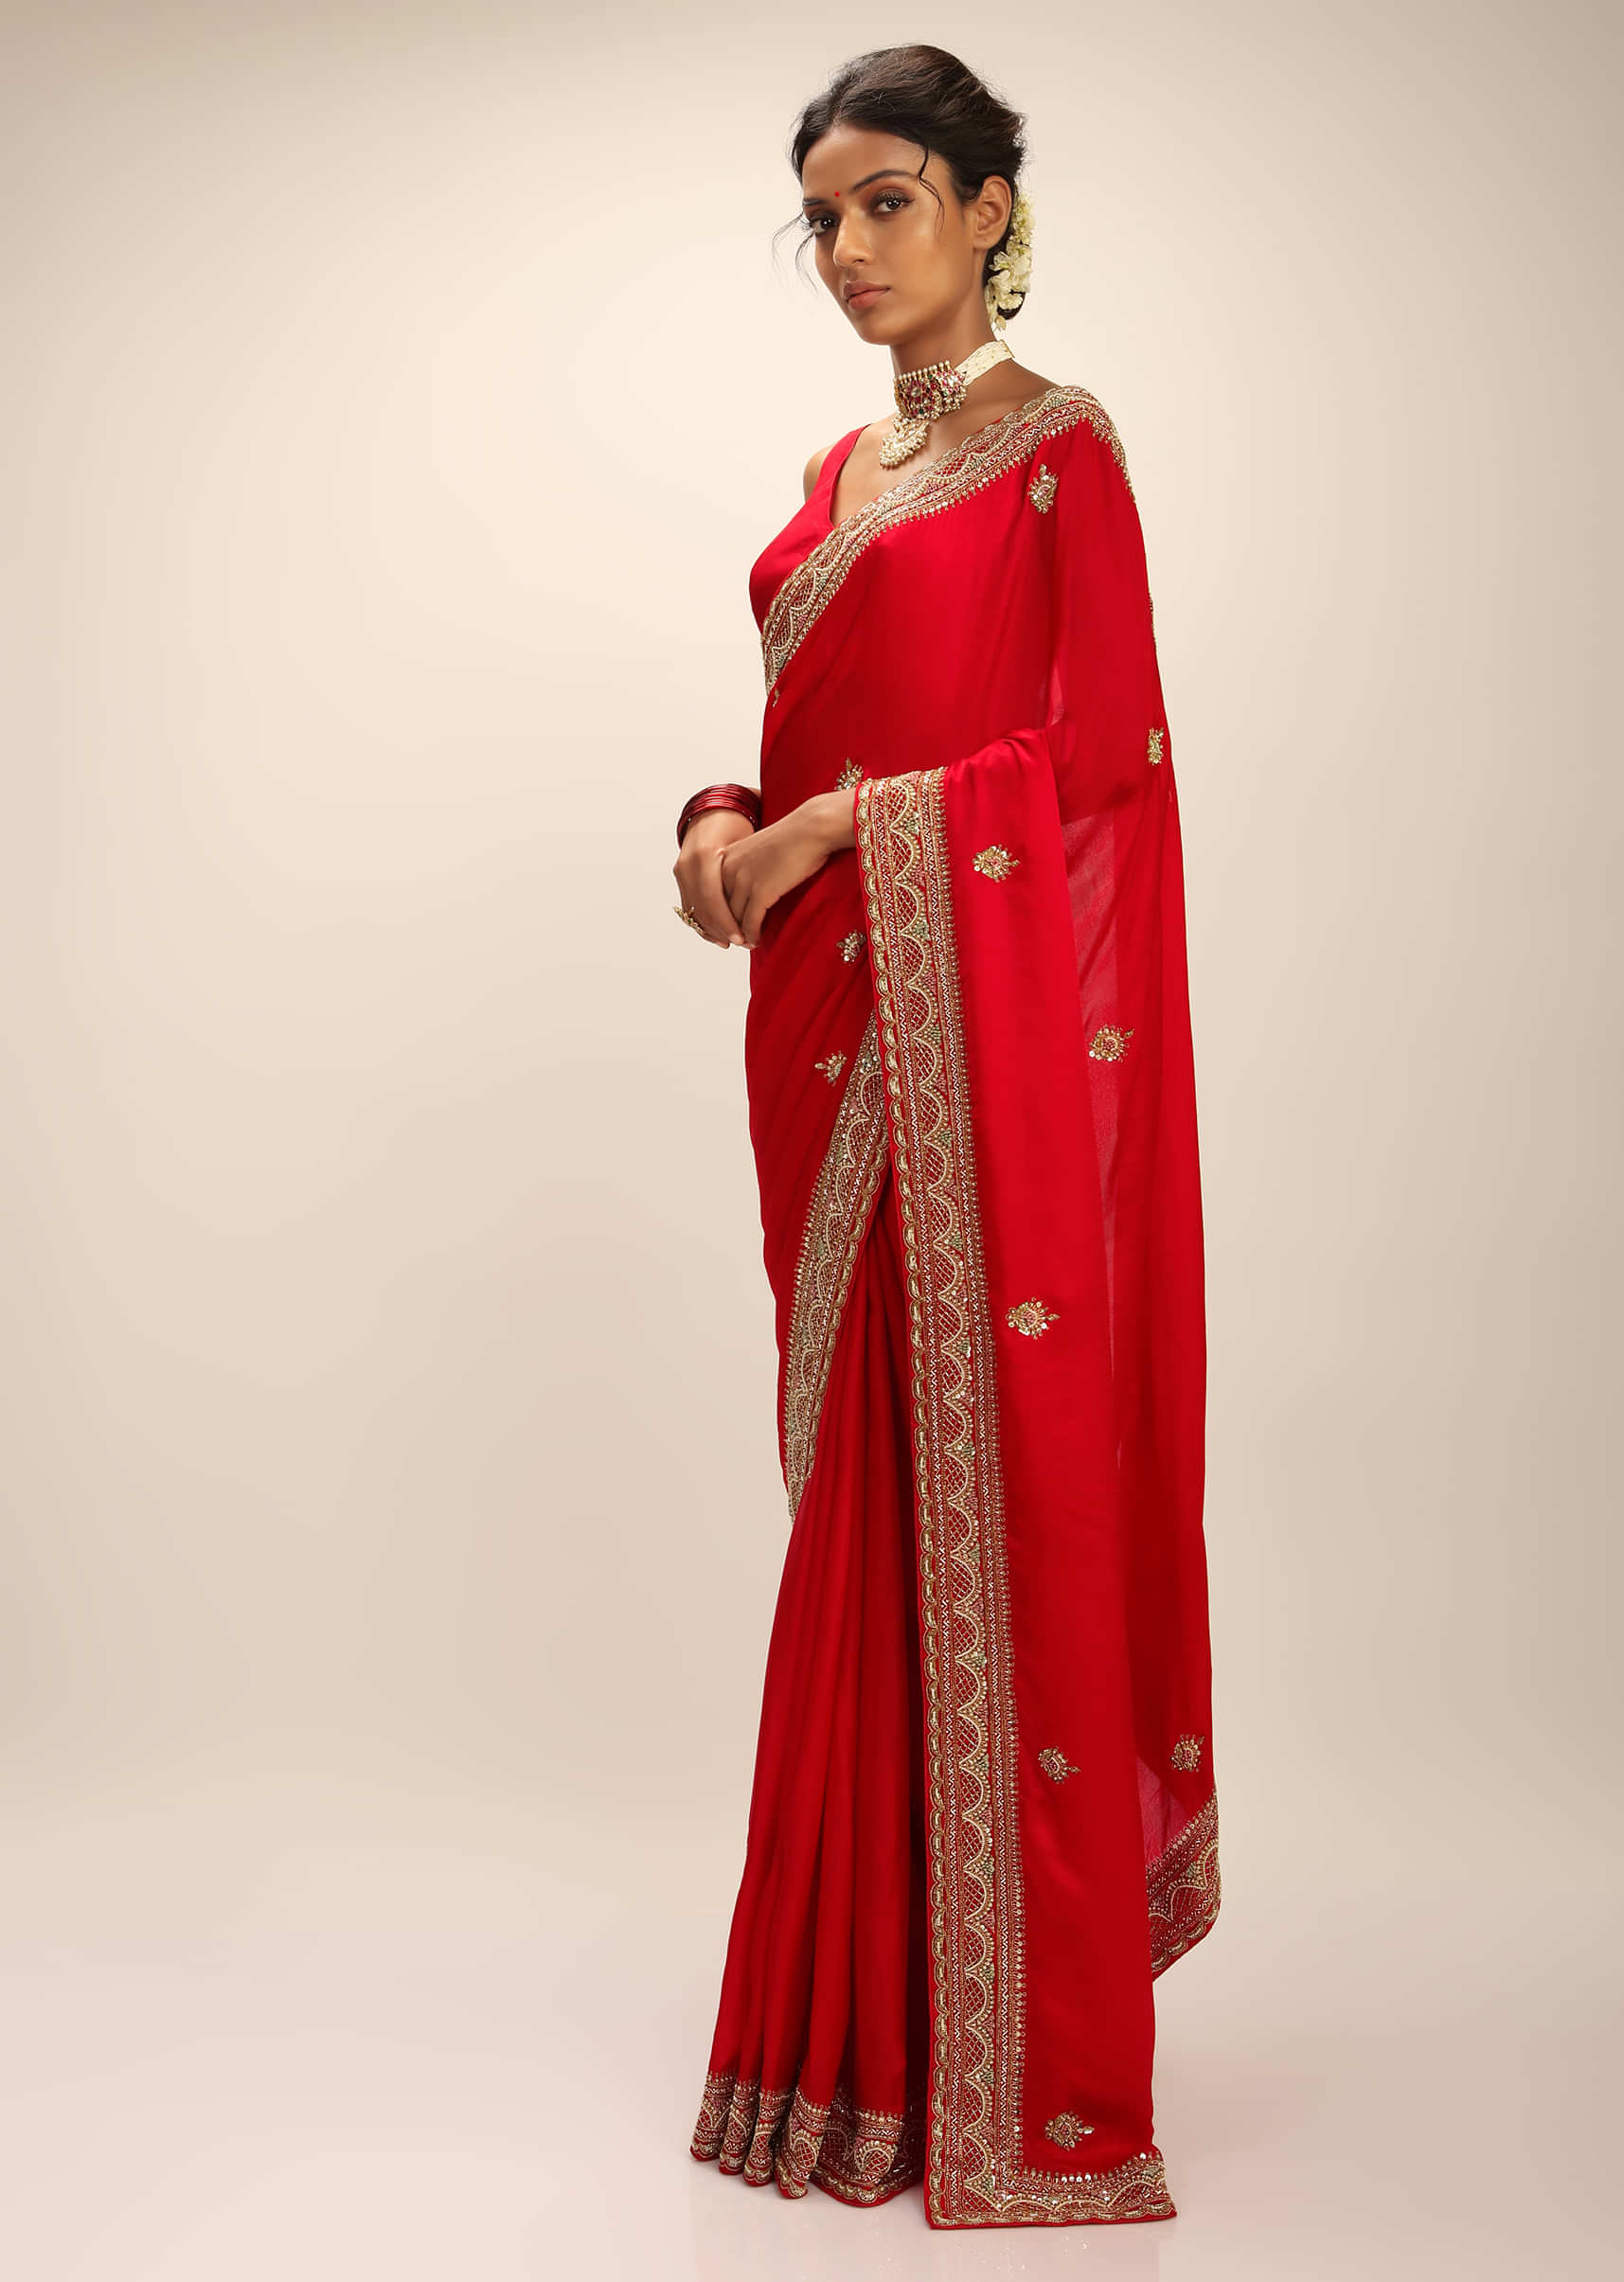 True Red Saree In Satin With Hand Embroidered Scallop Motifs On The Border And Butti Design 